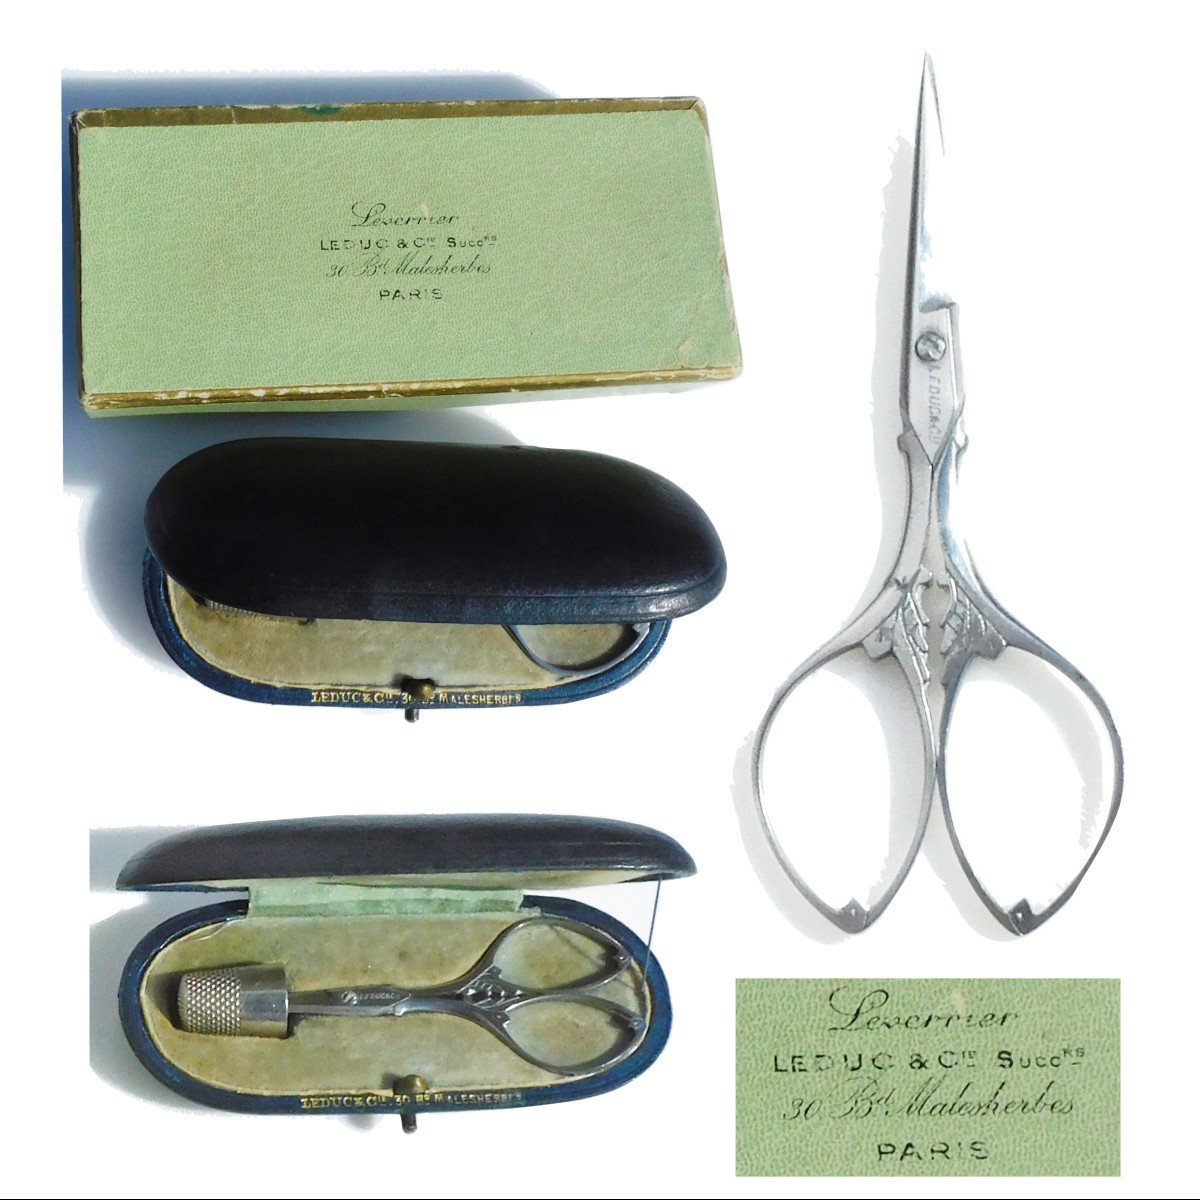 Pair Of Antique Scissors Signed Leduc & Cie In Their Leather Case And Box Early 20th Century